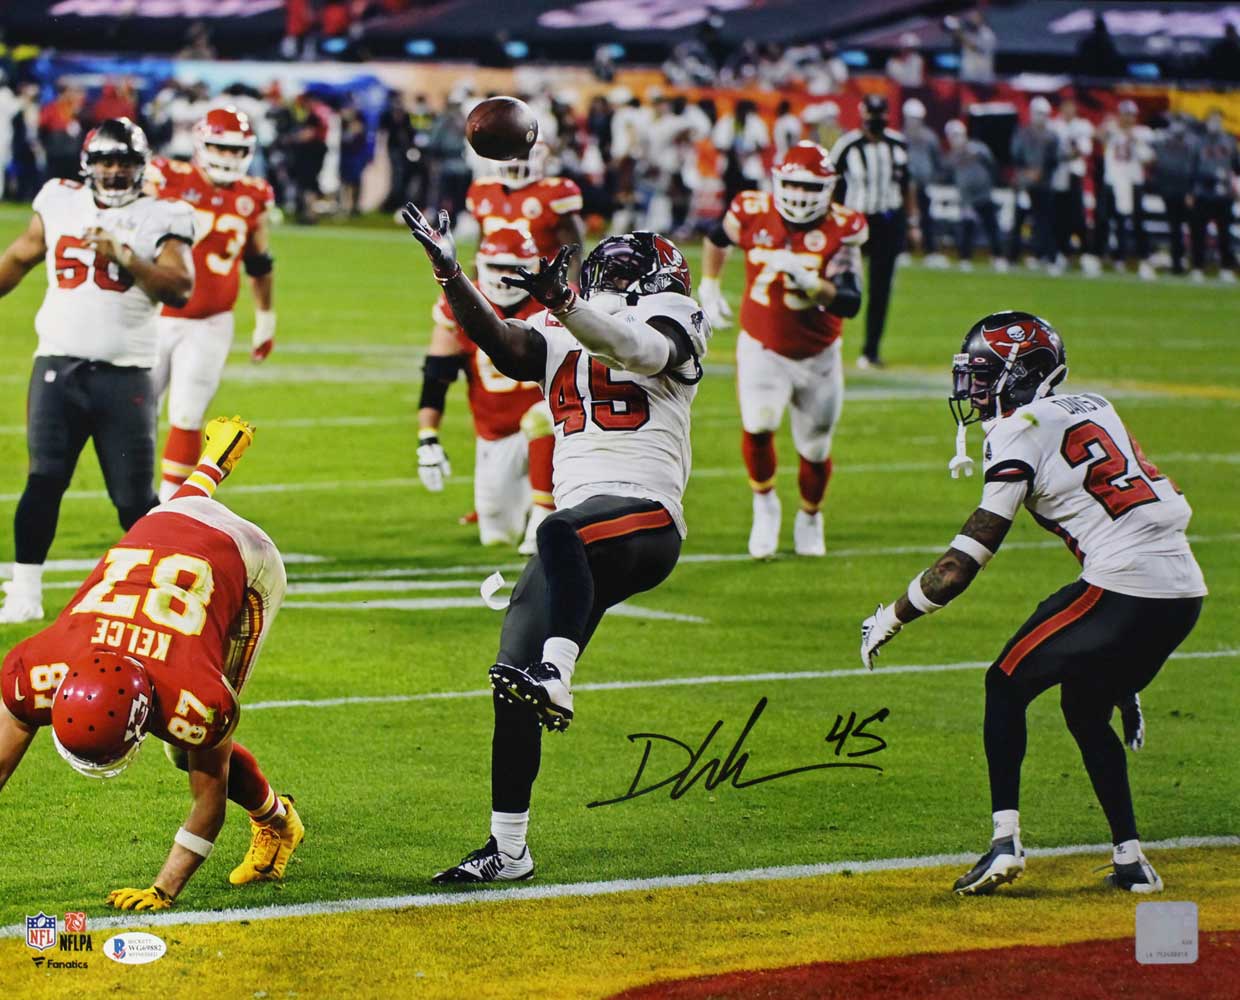 Devin White Autographed/Signed Tampa Bay Buccaneers 16x20 Photo BAS 31657